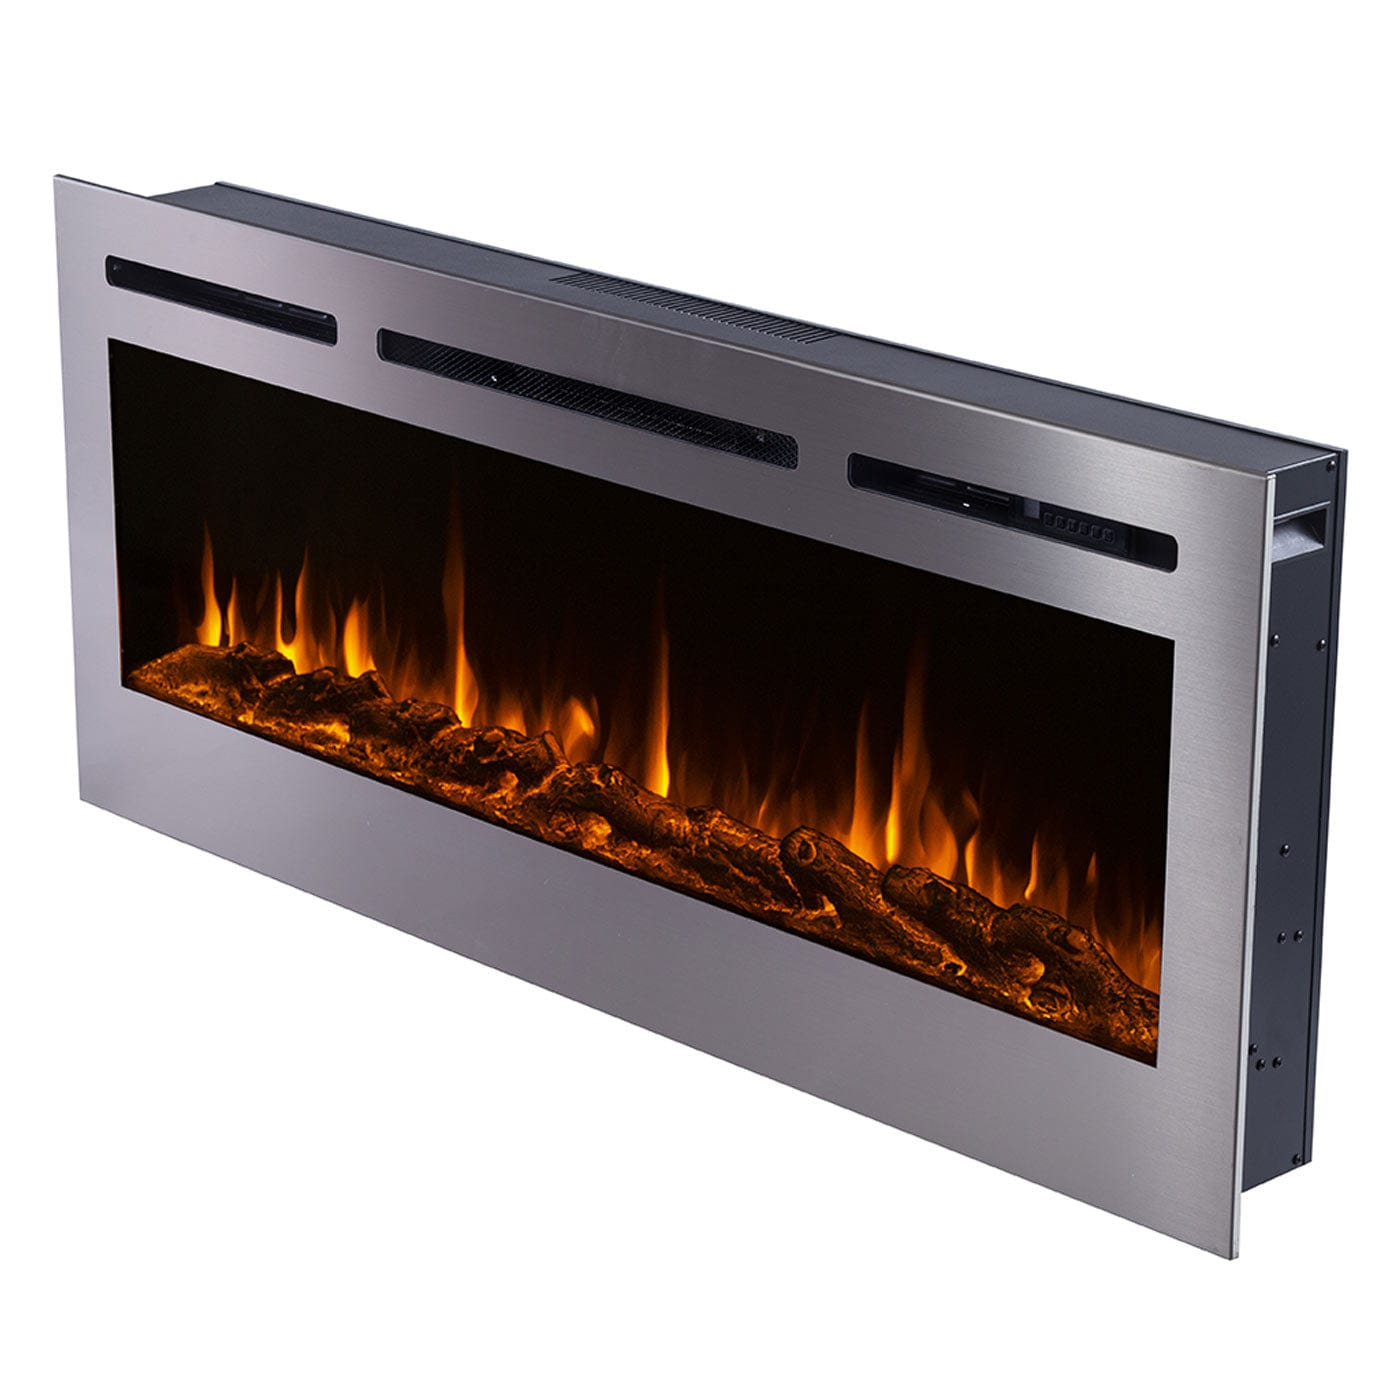 Touchstone Sideline Deluxe Electric Fireplace Stainless 60 inch